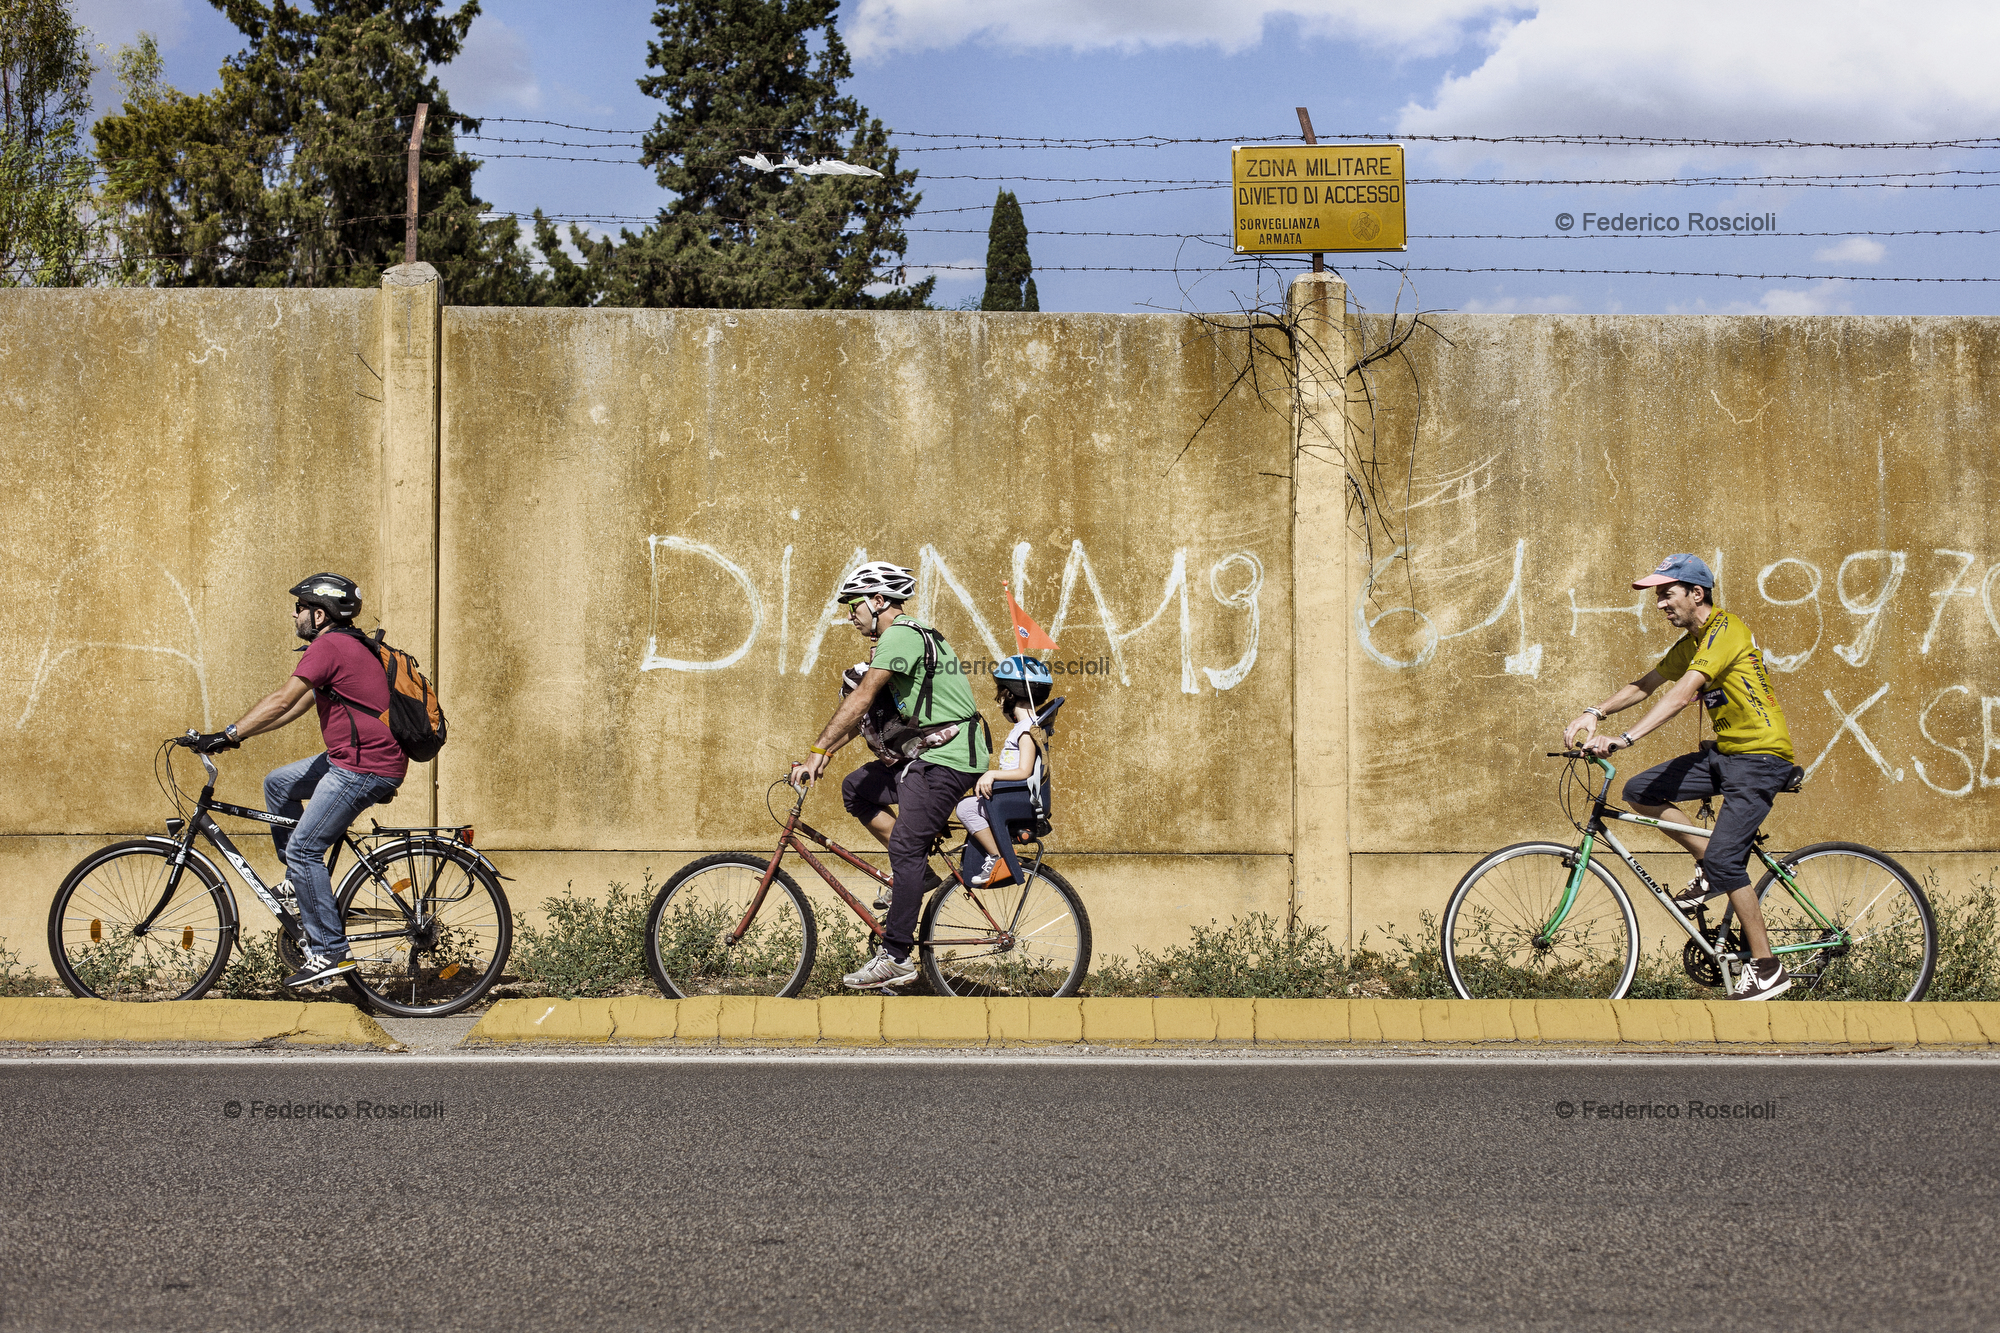 Taranto, Italy, September 22, 2013. A tour along the bicycle path of Taranto to revel the abandon status. The bicycle path runs almost completely along the Naval Base wall. The European Sustainable Mobility Week was organized for the first time in Taranto by the associations The Howlers and Cirano, and the support of the Municipality of Taranto.